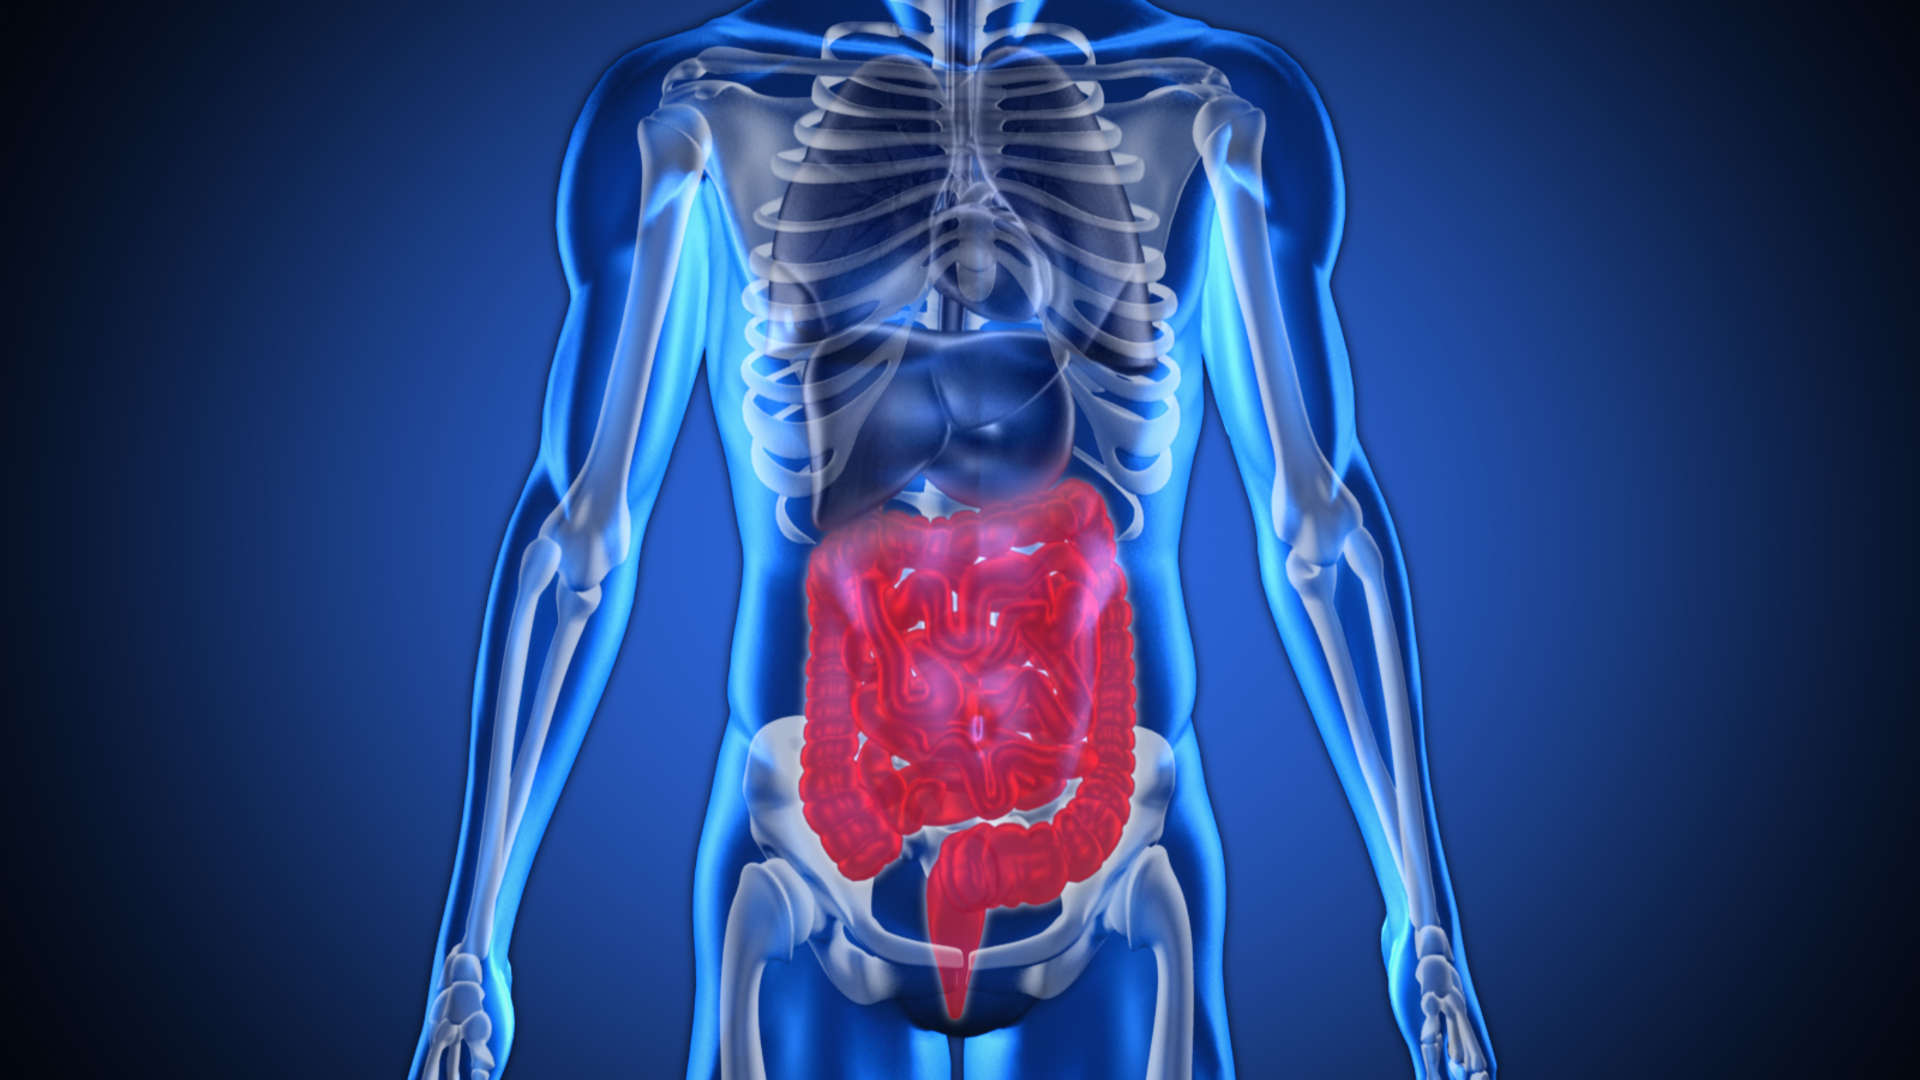 The importance of gut health and the link between gut health and overall health